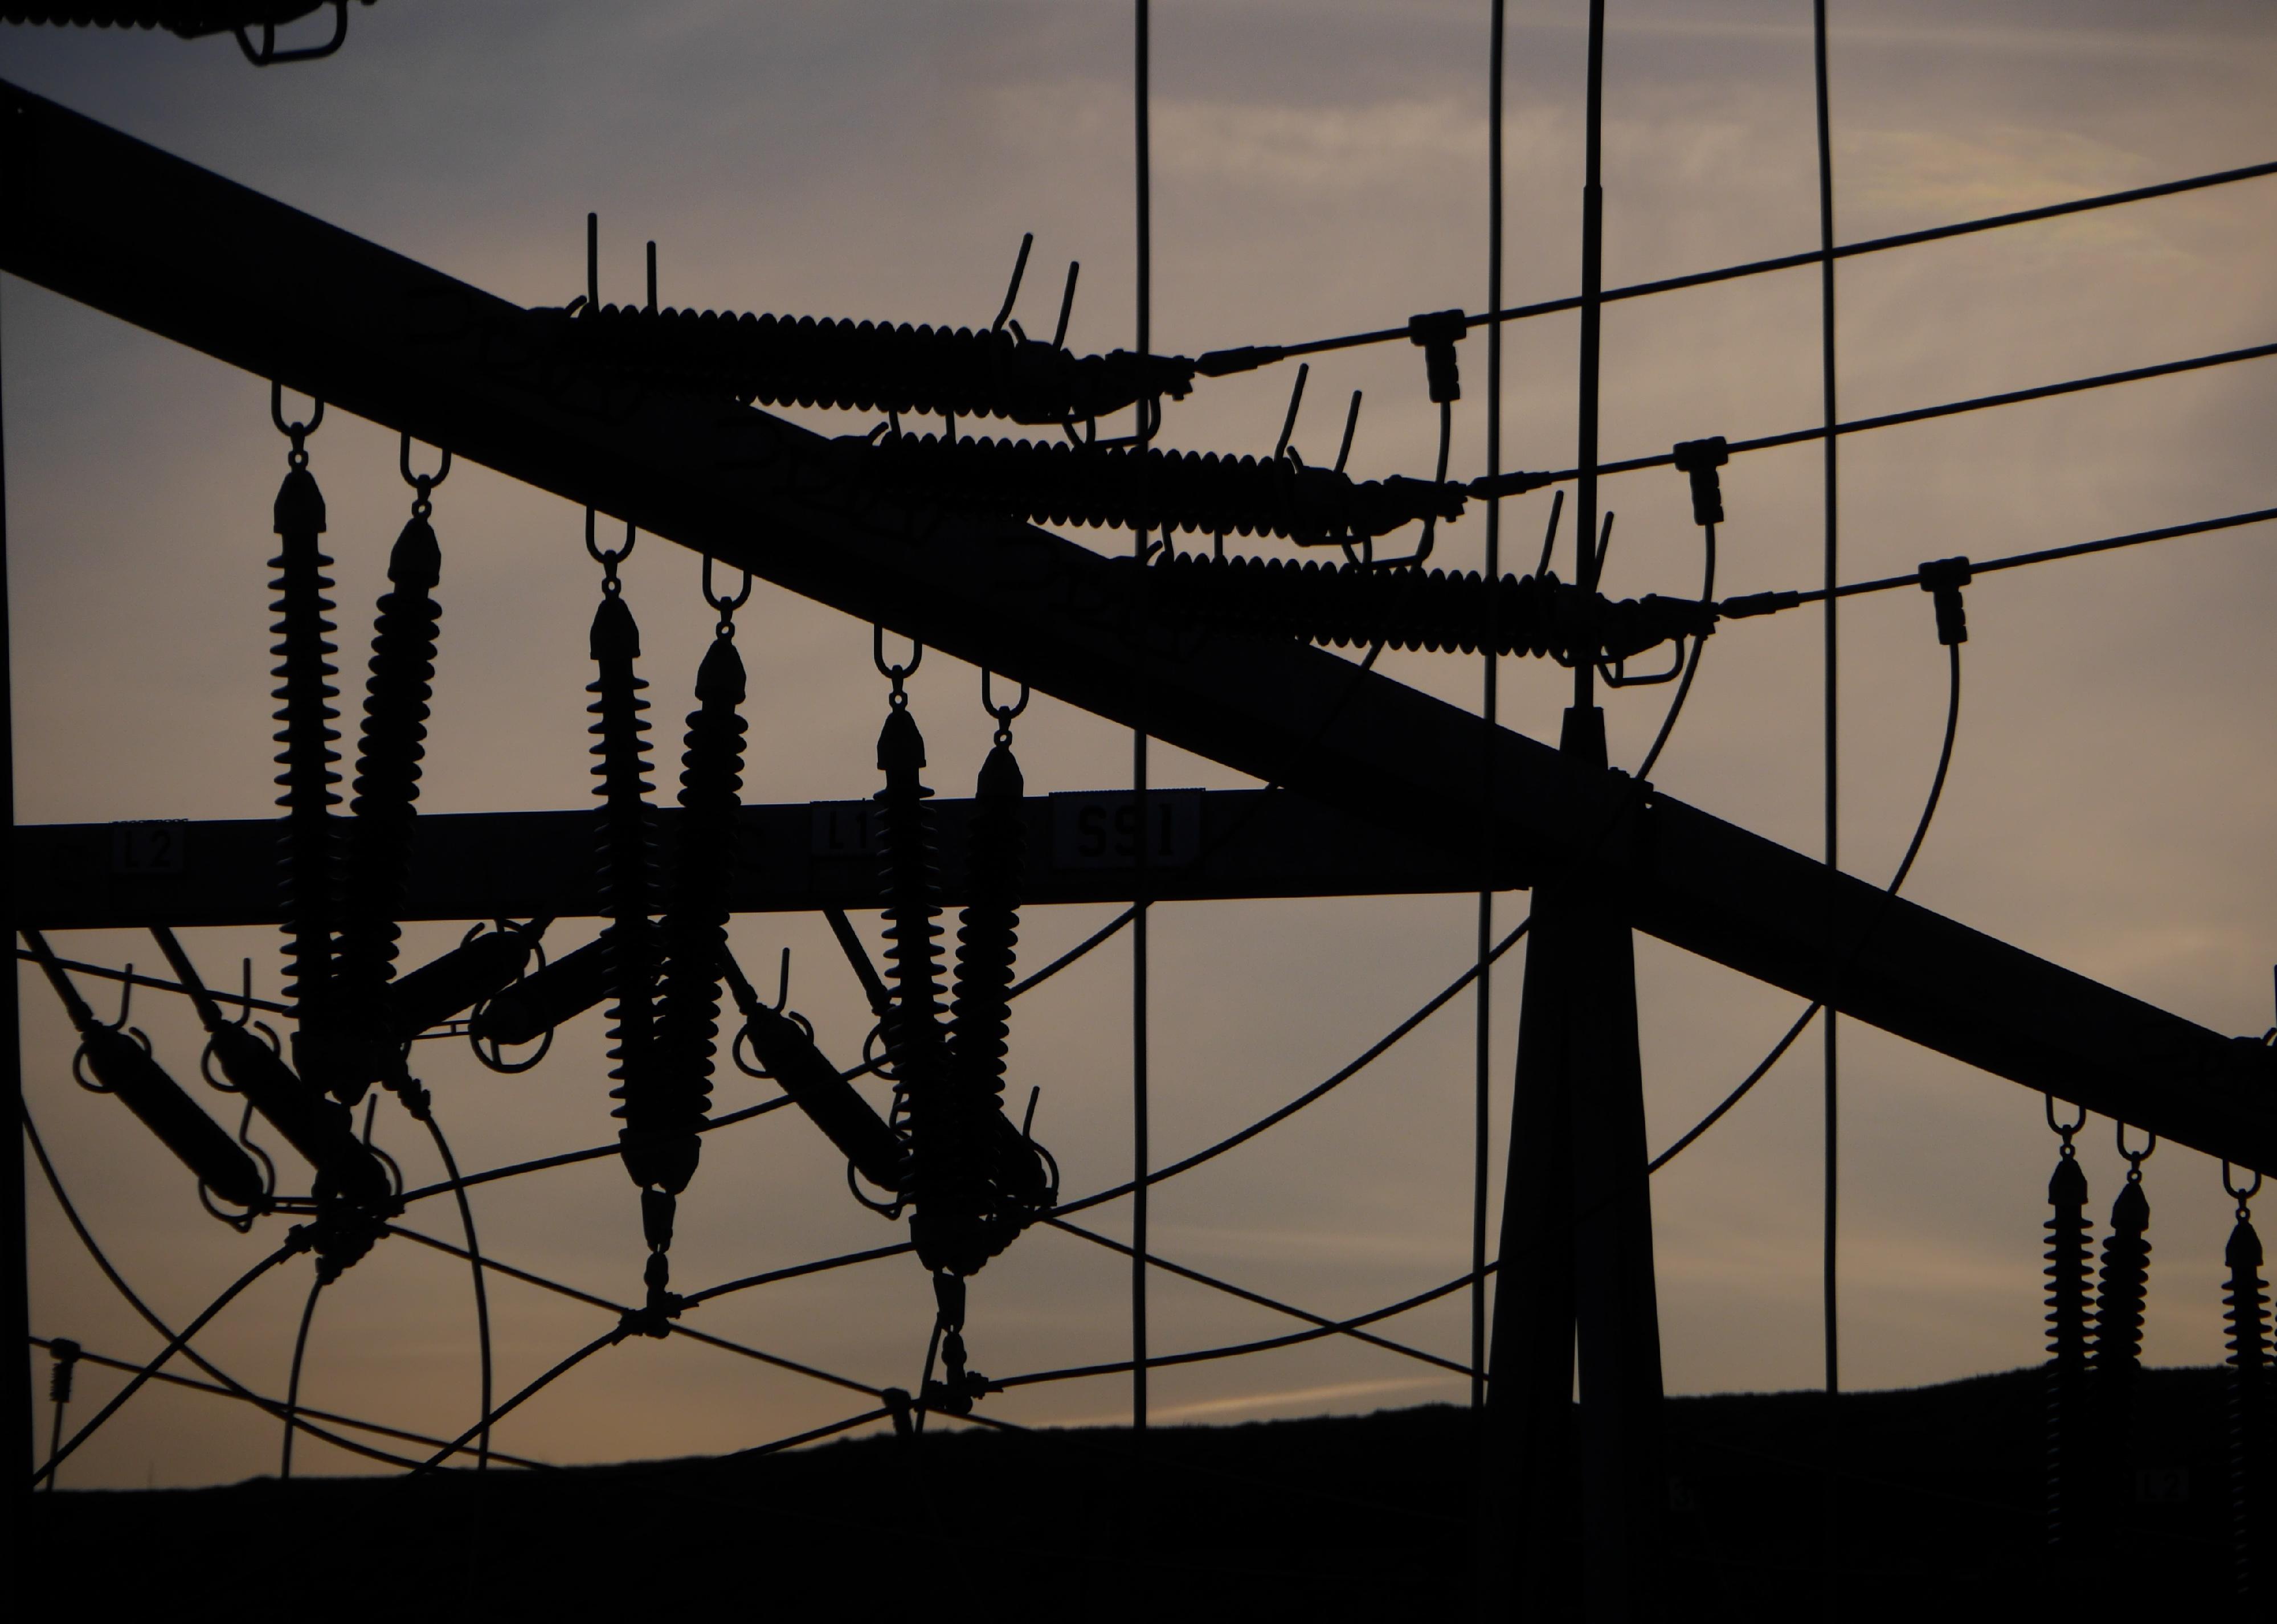 Electrical power grid in silhouette.